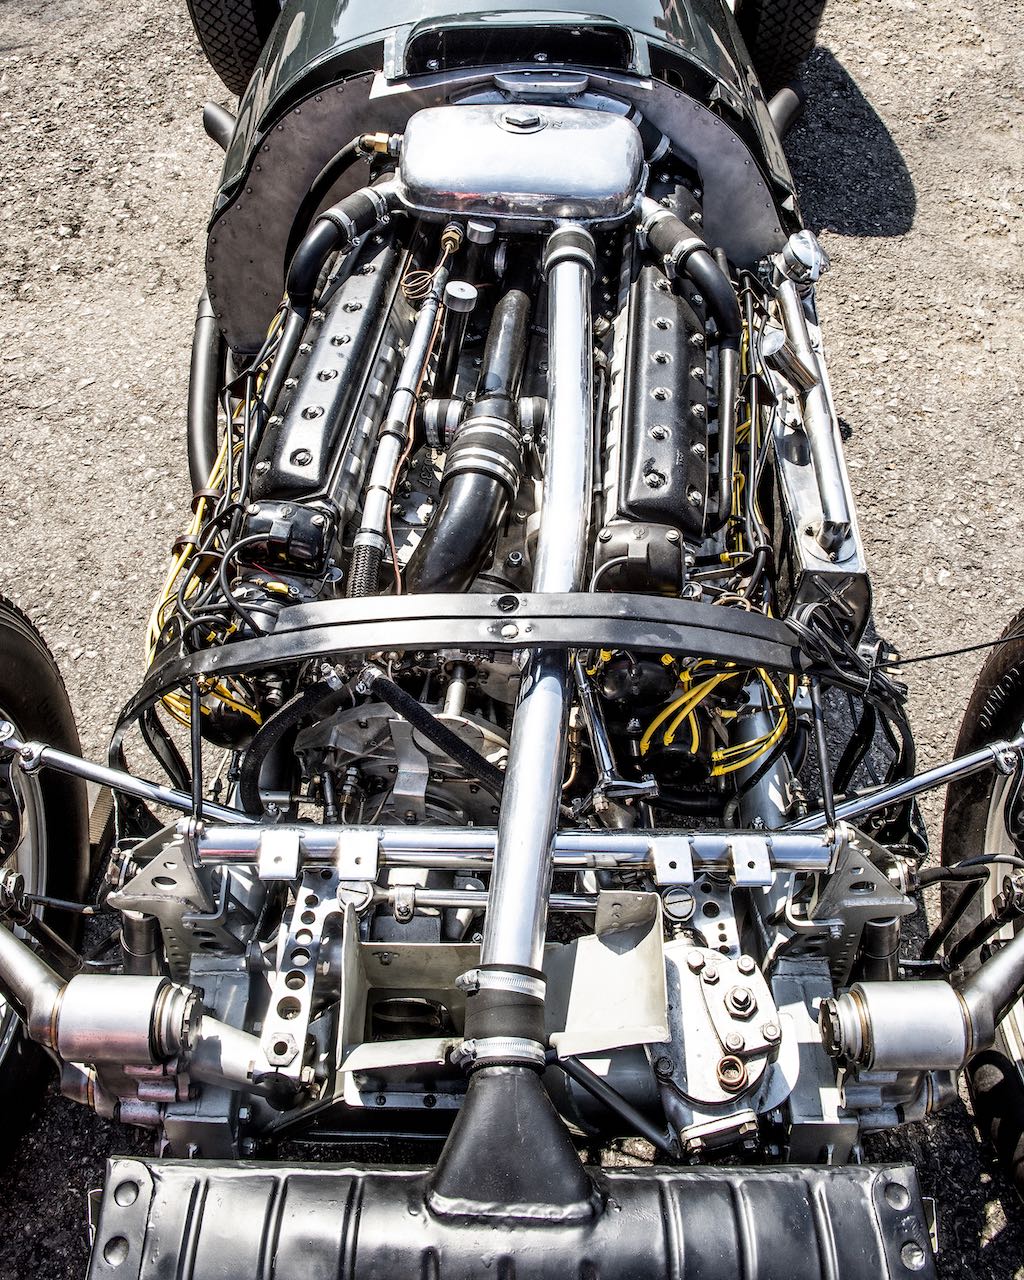 BRM hits new milestone with successful V16 engine test